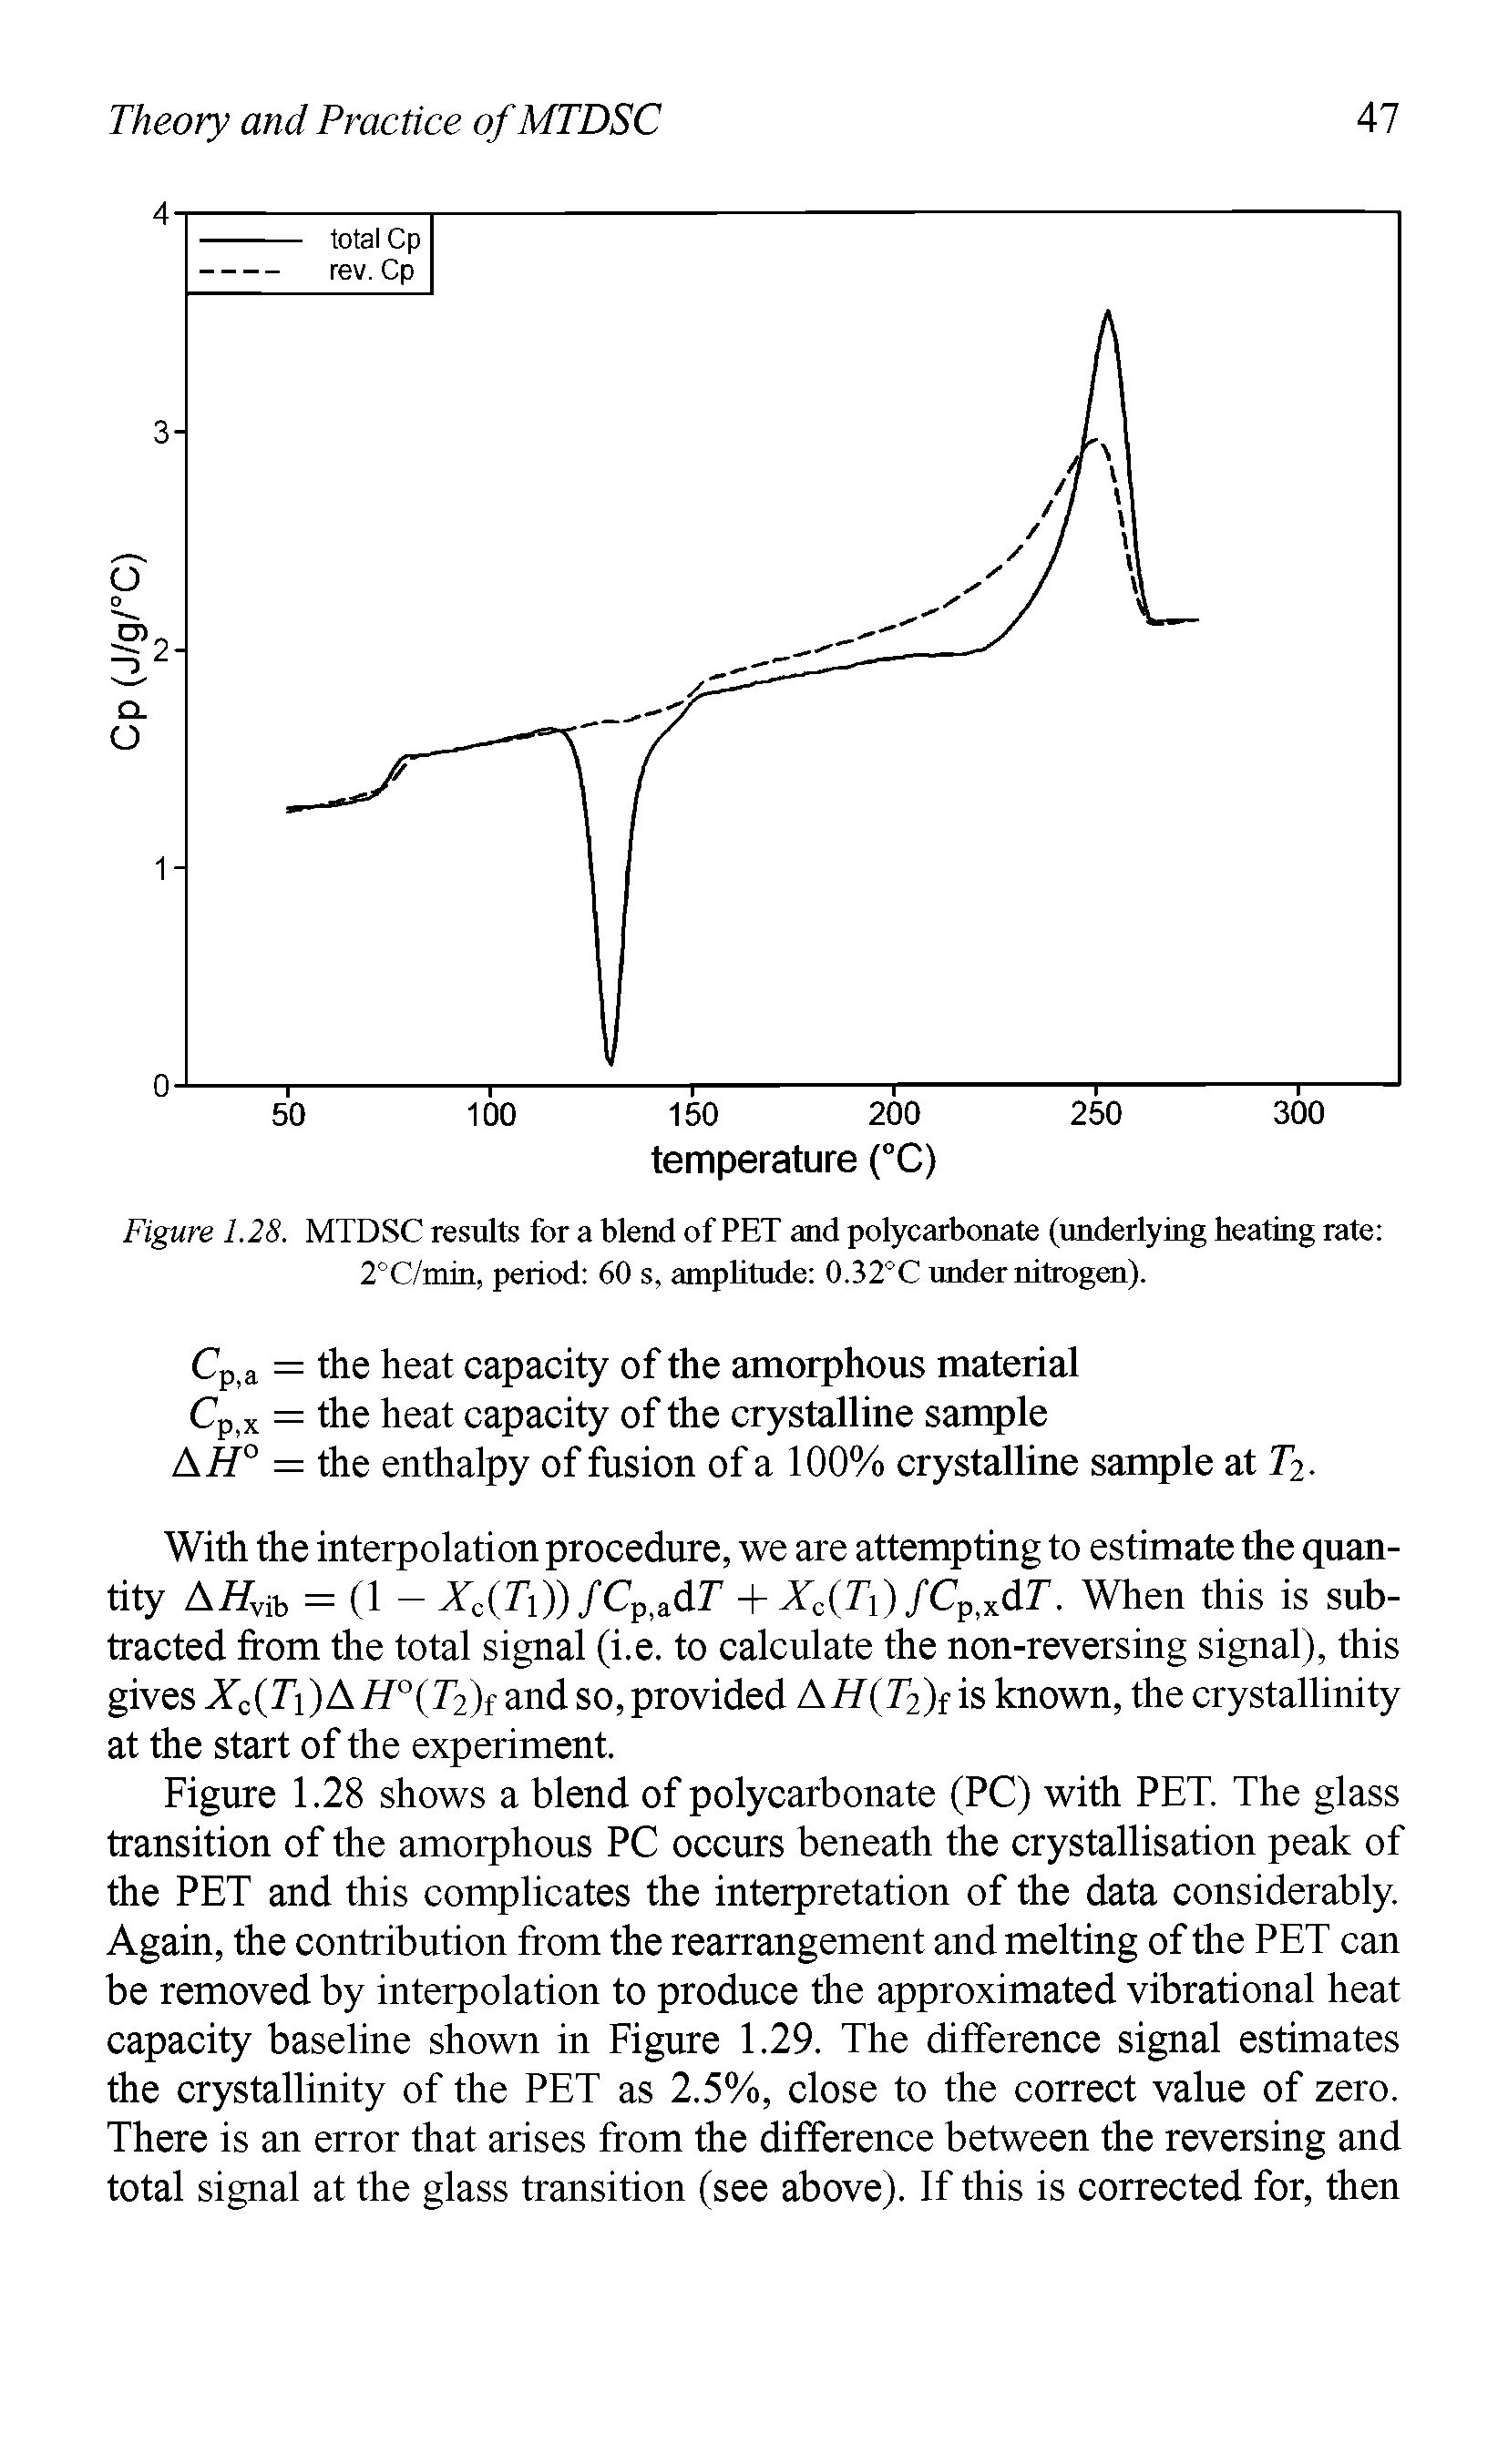 Figure 1.28 shows a blend of polycarbonate (PC) with PET. The glass transition of the amorphous PC occiu s beneath the crystallisation peak of the PET and this complicates the interpretation of the data considerably. Again, the contribution from the rearrangement and melting of the PET can be removed by interpolation to produce the approximated vibrational heat capacity baseline shown in Figure 1.29. The difference signal estimates the crystallinity of the PET as 2.5%, close to the correct value of zero. There is an error that arises from the difference between the reversing and total signal at the glass transition (see above). If this is corrected for, then...